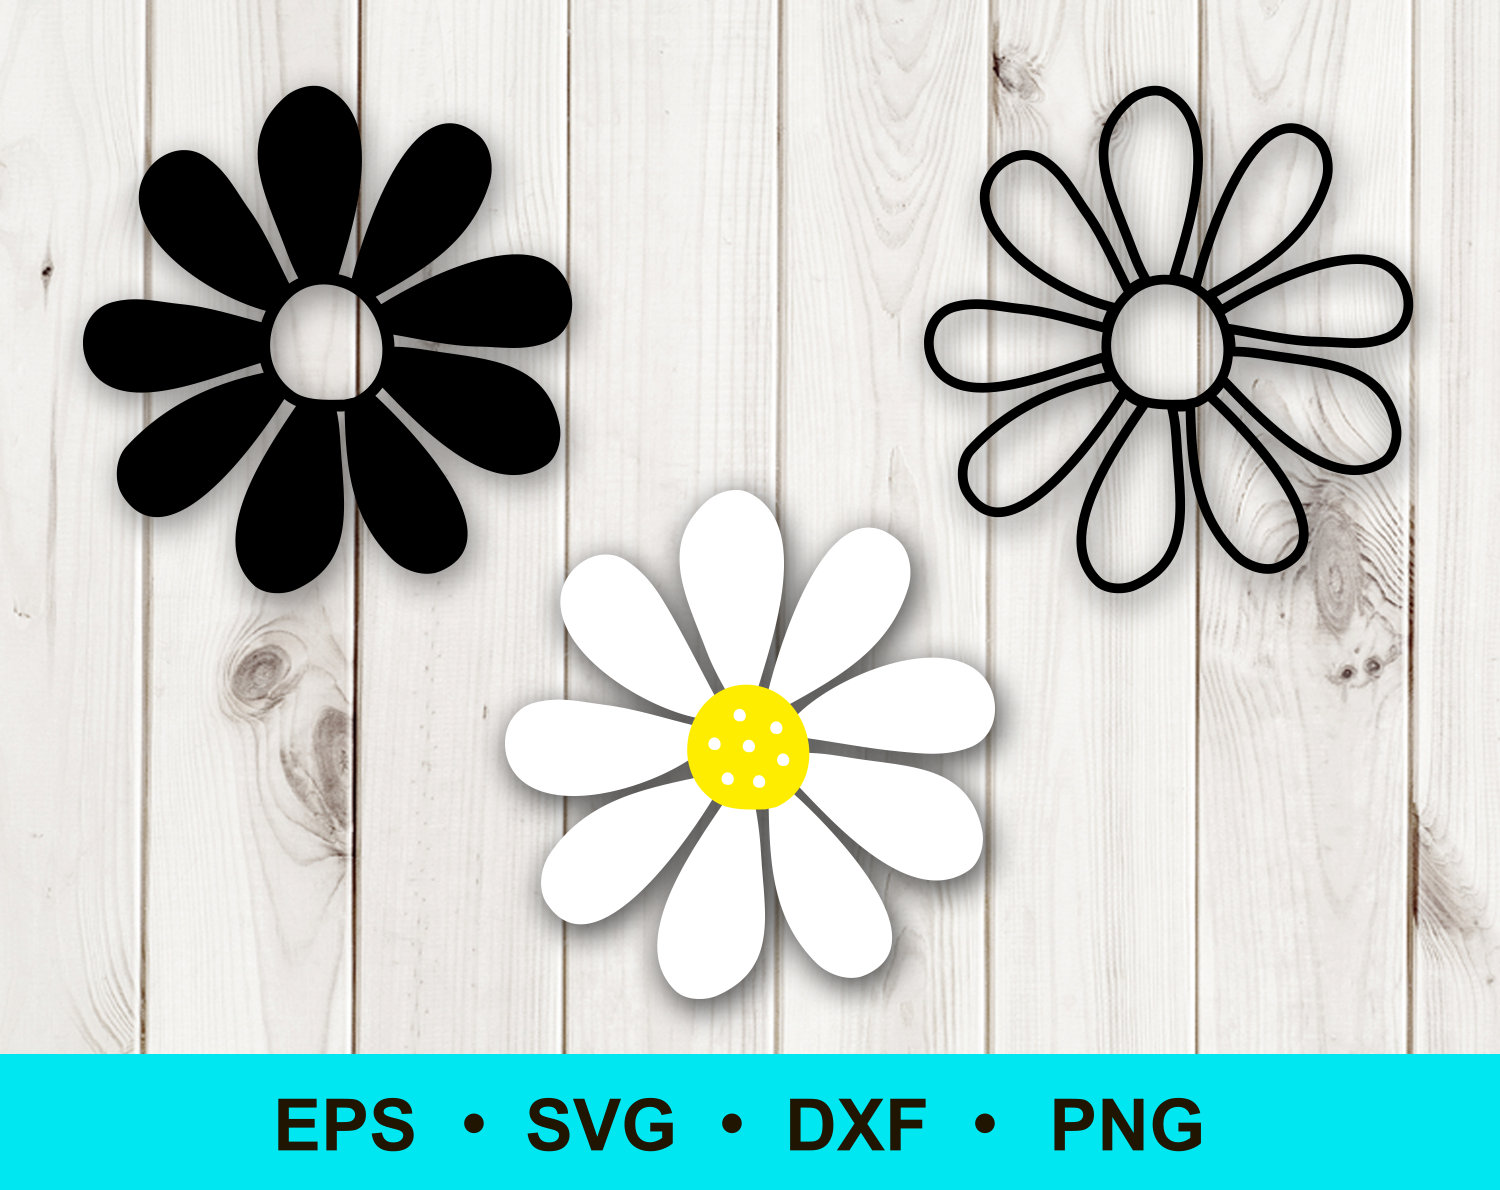 Daisy flower SVG PNG DXF eps. Simple flower shape cut | Etsy